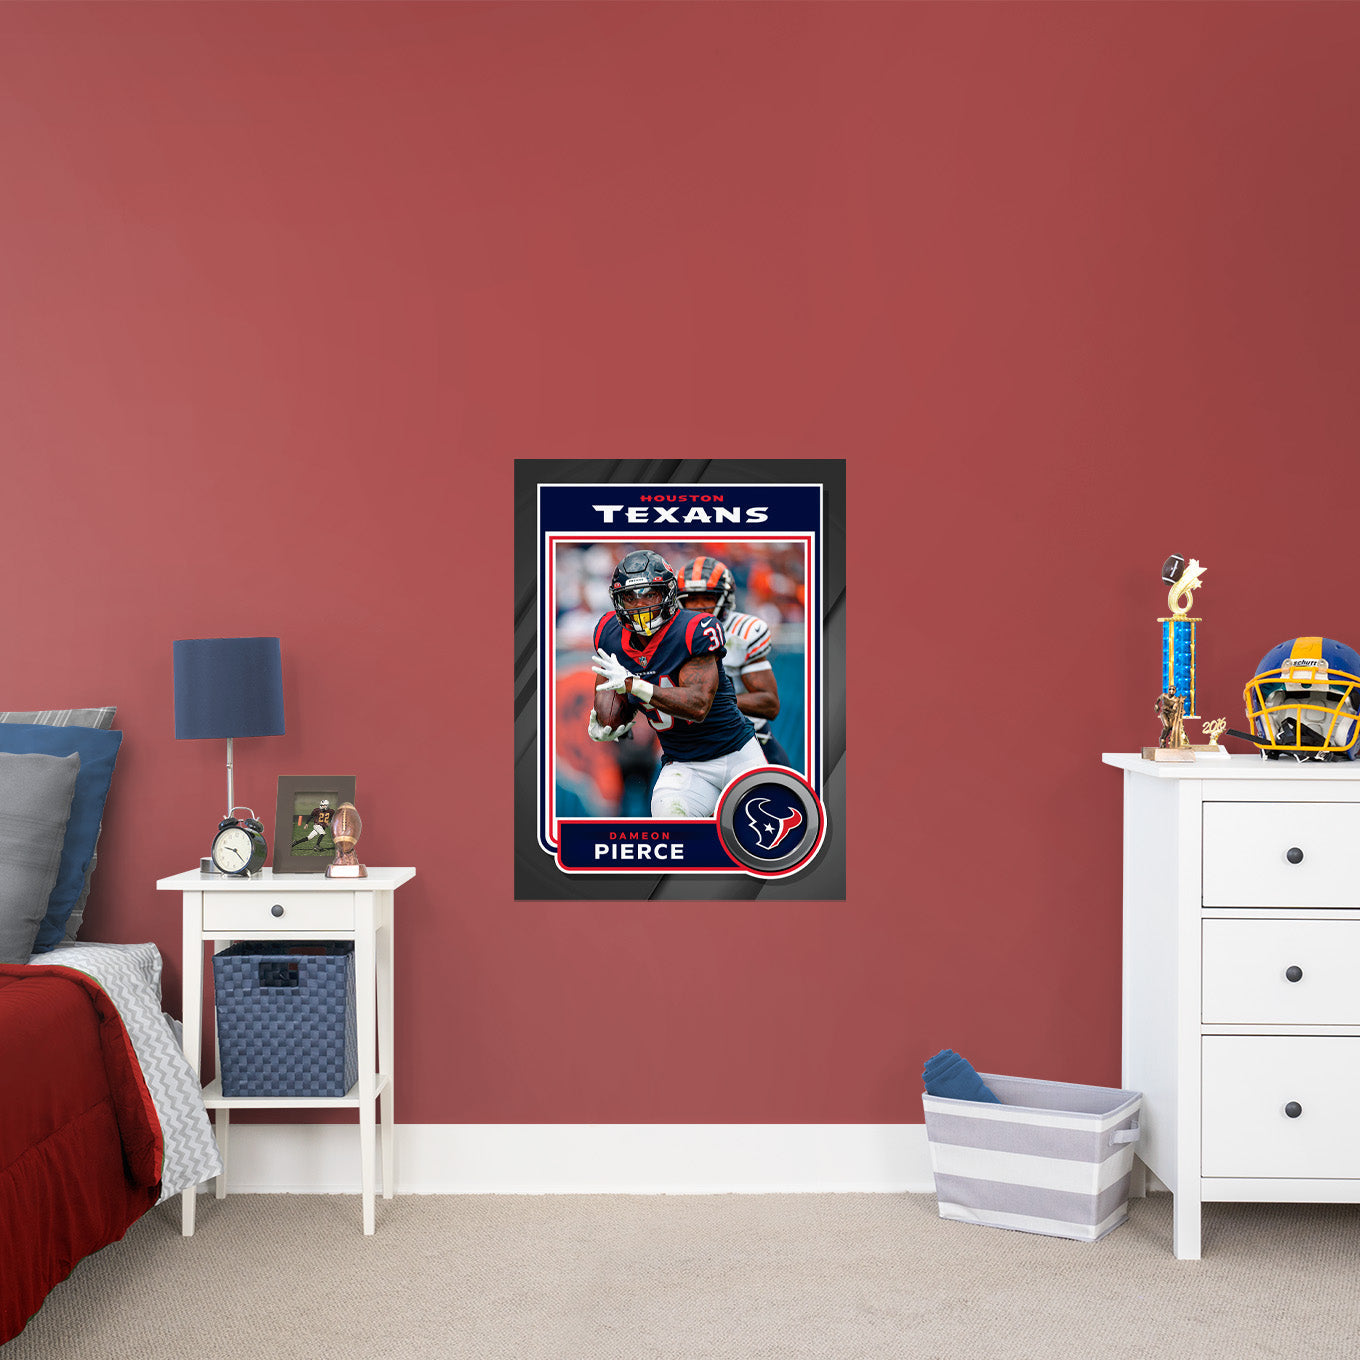 Houston Texans: Dameon Pierce Poster - Officially Licensed NFL Removable Adhesive Decal